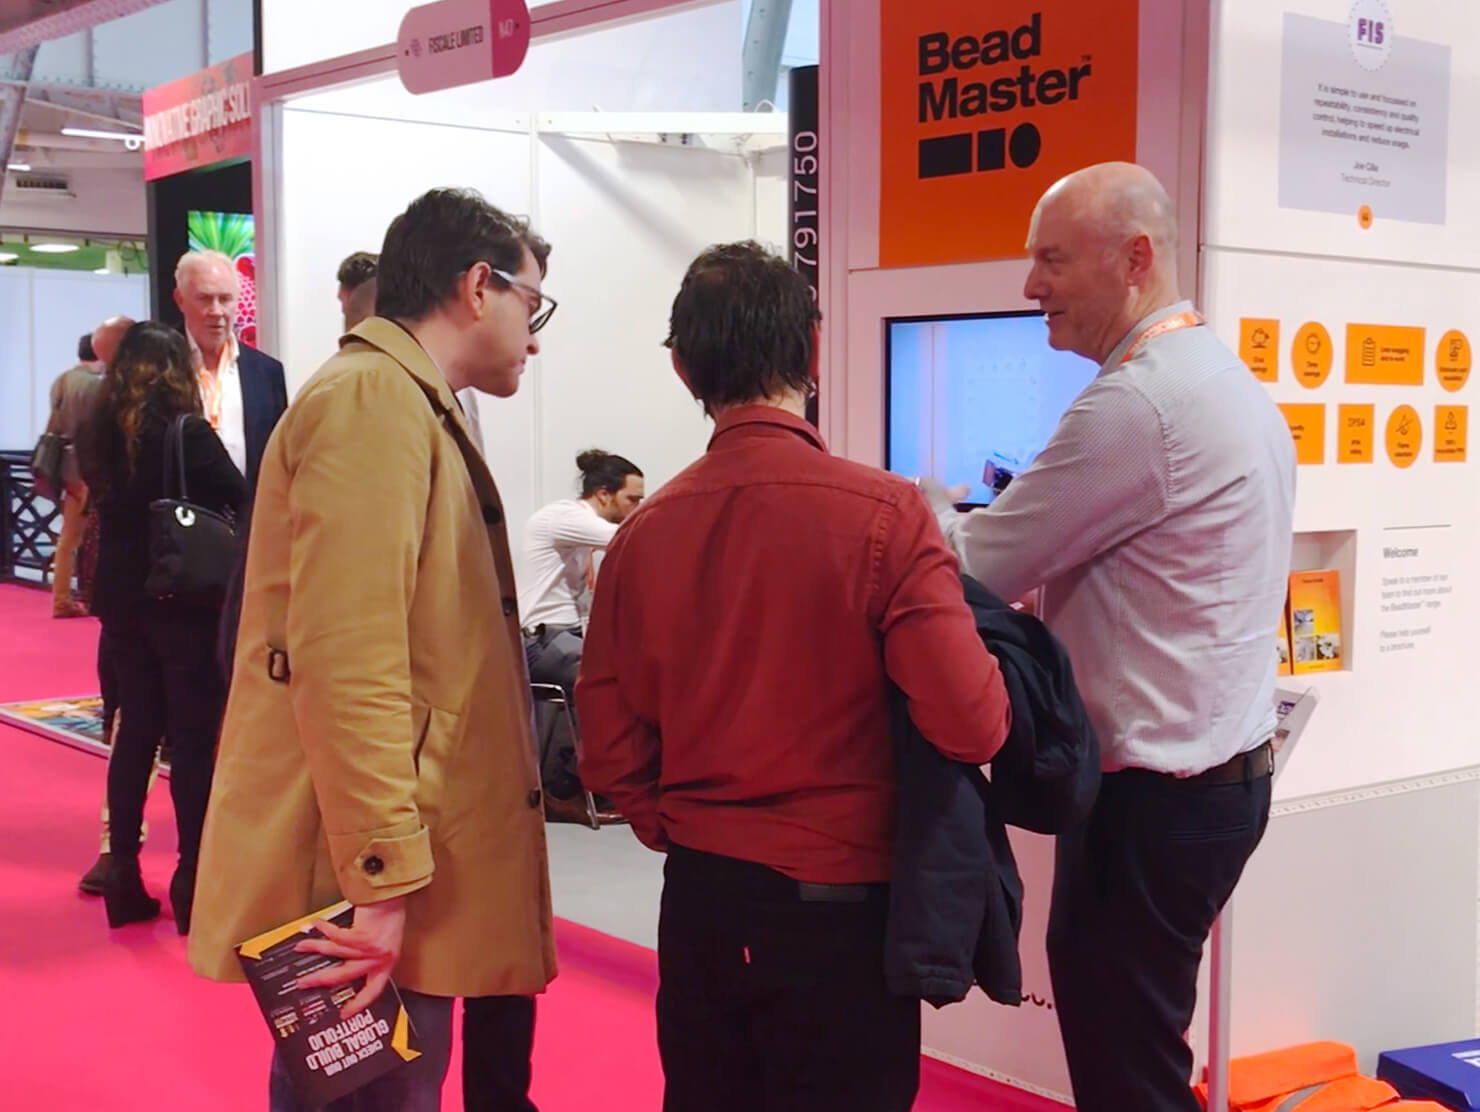 The BeadMaster™ launch event at London Build 2019